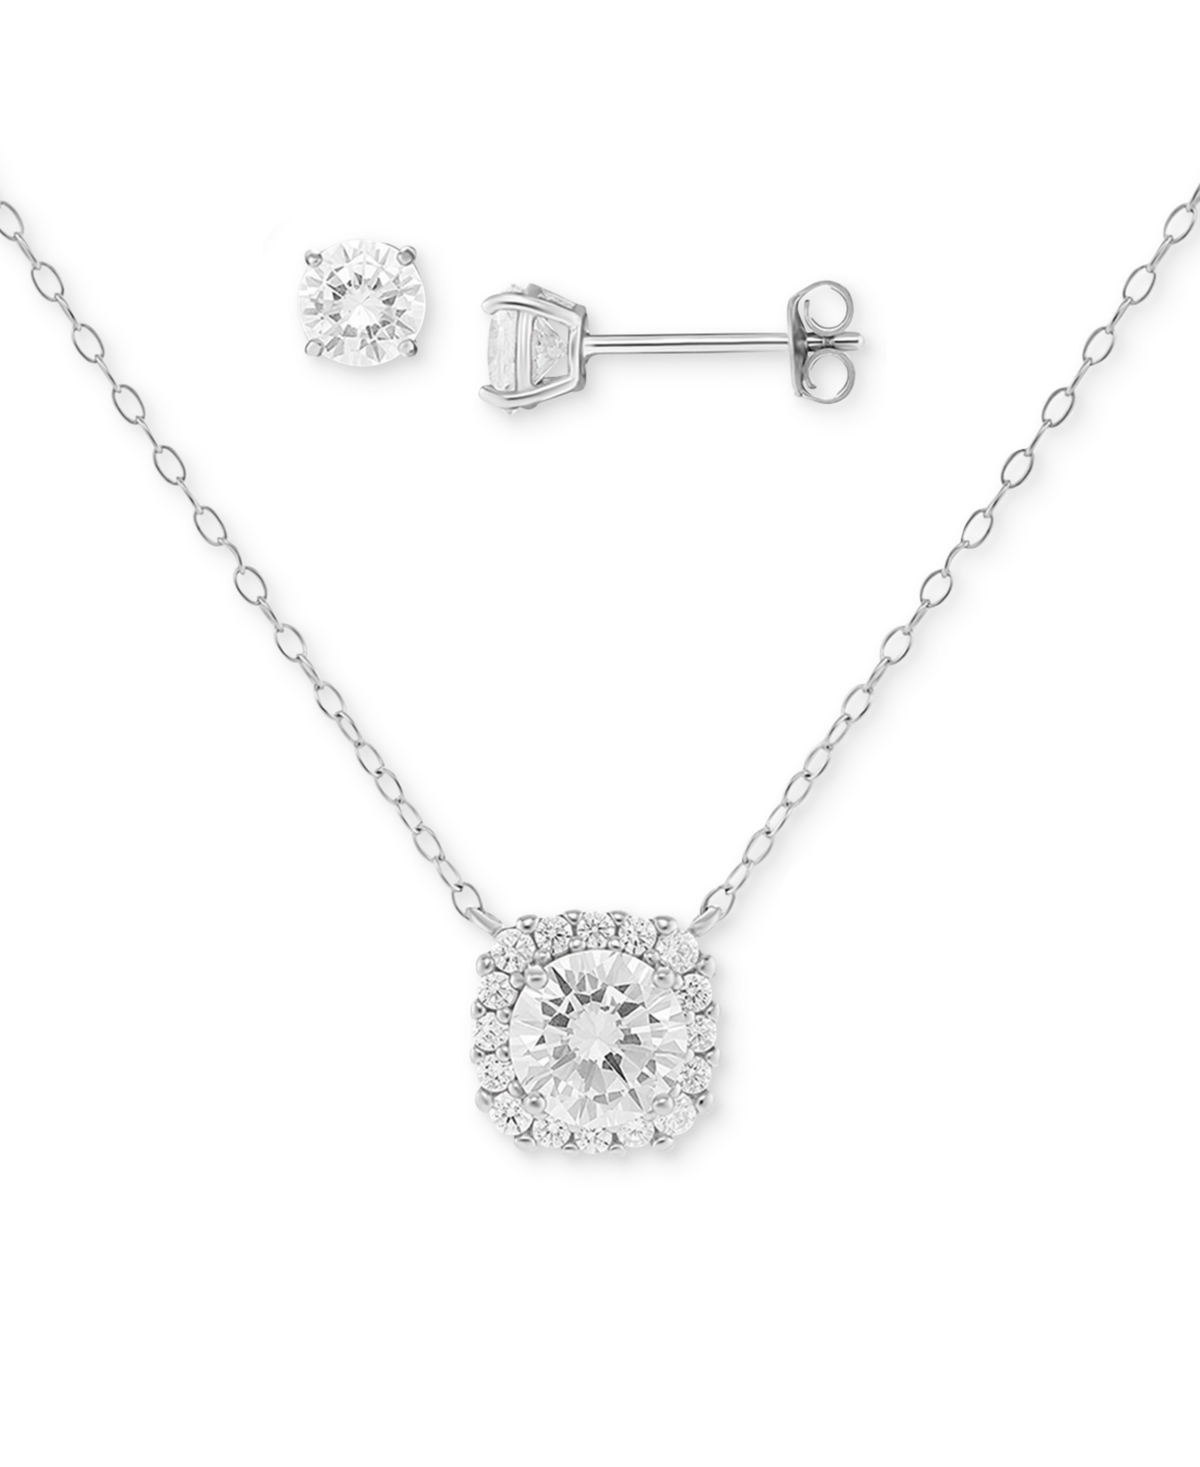 2-Pc. Set Cubic Zirconia Halo Pendant Necklace & Solitaire Stud Earrings in Sterling Silver, Created for Macy's - Sterling Silver